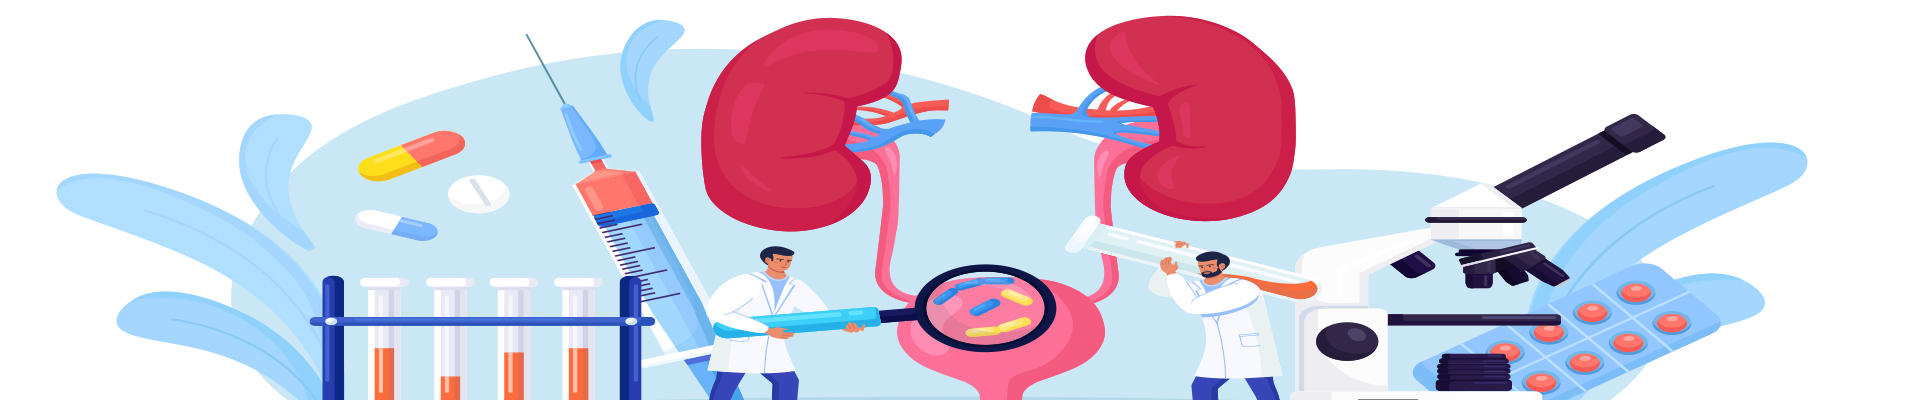 Urology is the branch of medicine that focuses on surgical and medical diseases of the urinary-tract system and the reproductive organs. Organs under the domain of urology include the kidneys, adrenal glands, ureters, urinary bladder, urethra, and the male reproductive organs.